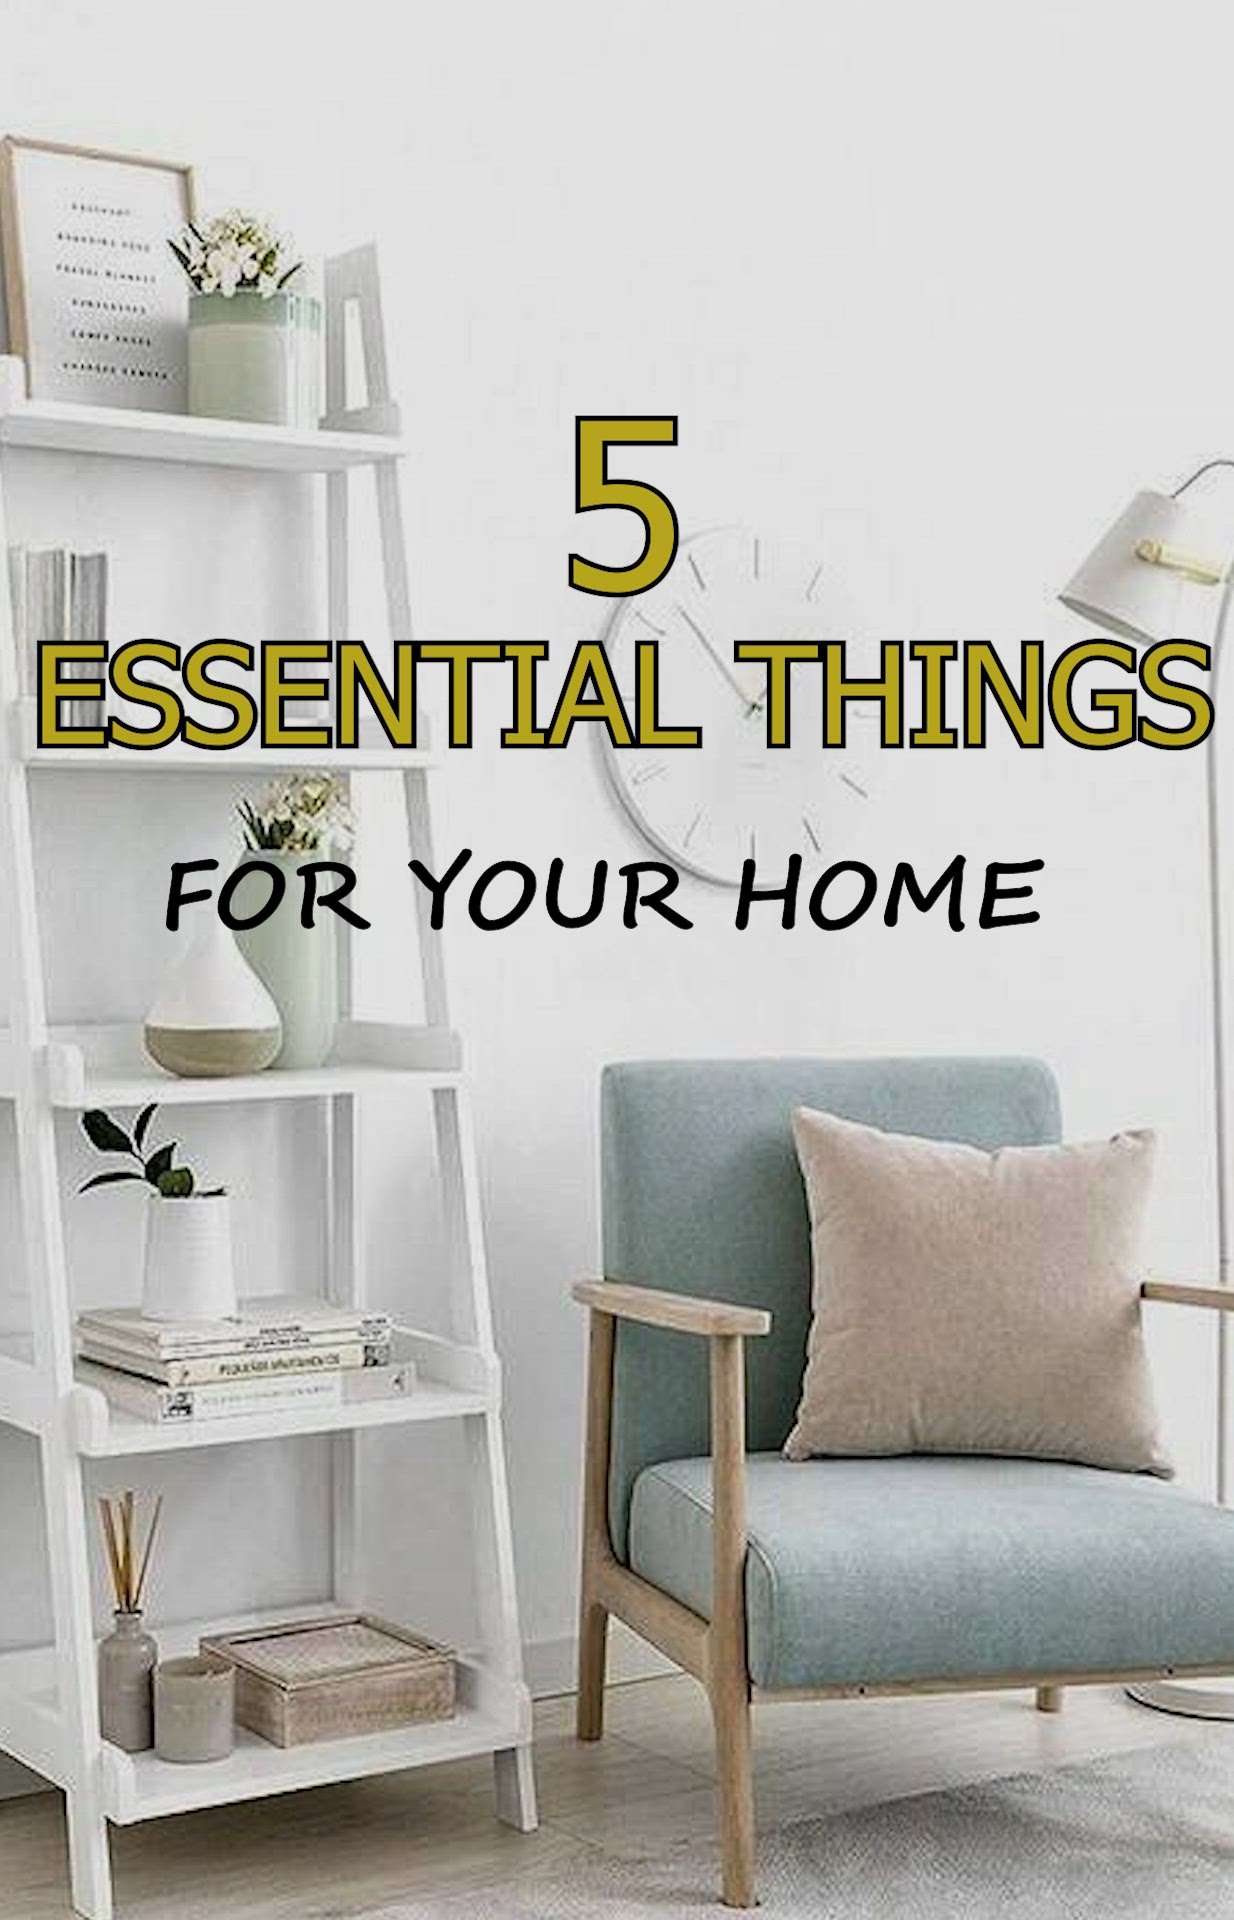 5 Essential things for your home. 

#creatorsofkolo #musthave #home #kitchenideas #modernhomes  #ideas #essentials #kerala #Ernakulam #house #home #design #kitchen #living #wardrobe #interior #diy #key #shoerack #musthavething #essential #top5 #HouseDesigns #interiroideas #interiorwork #designer #interiordesigner